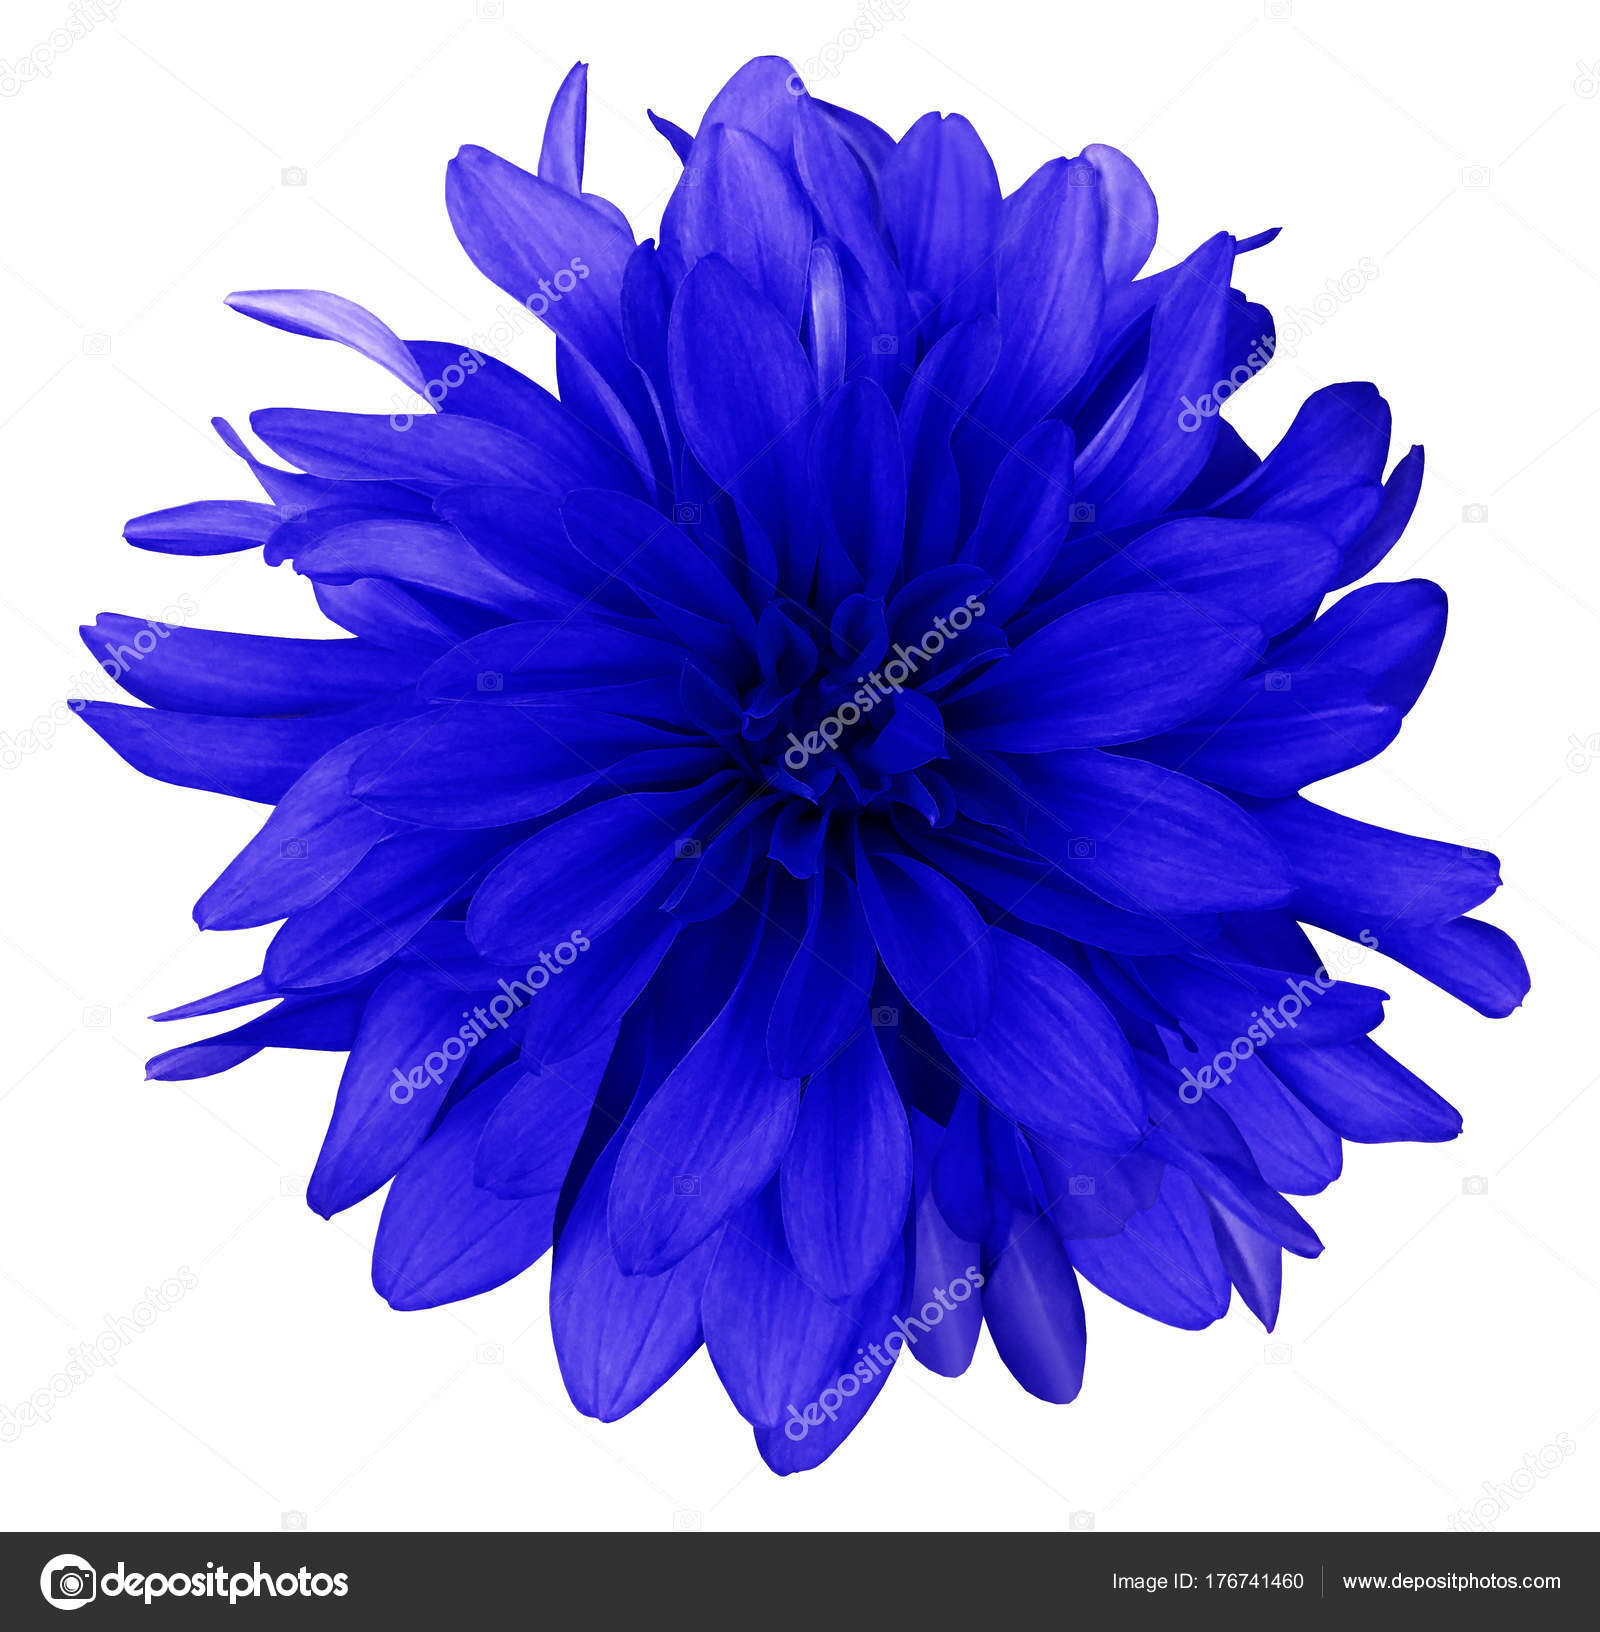 White Background With Blue Flowers - Round Designs